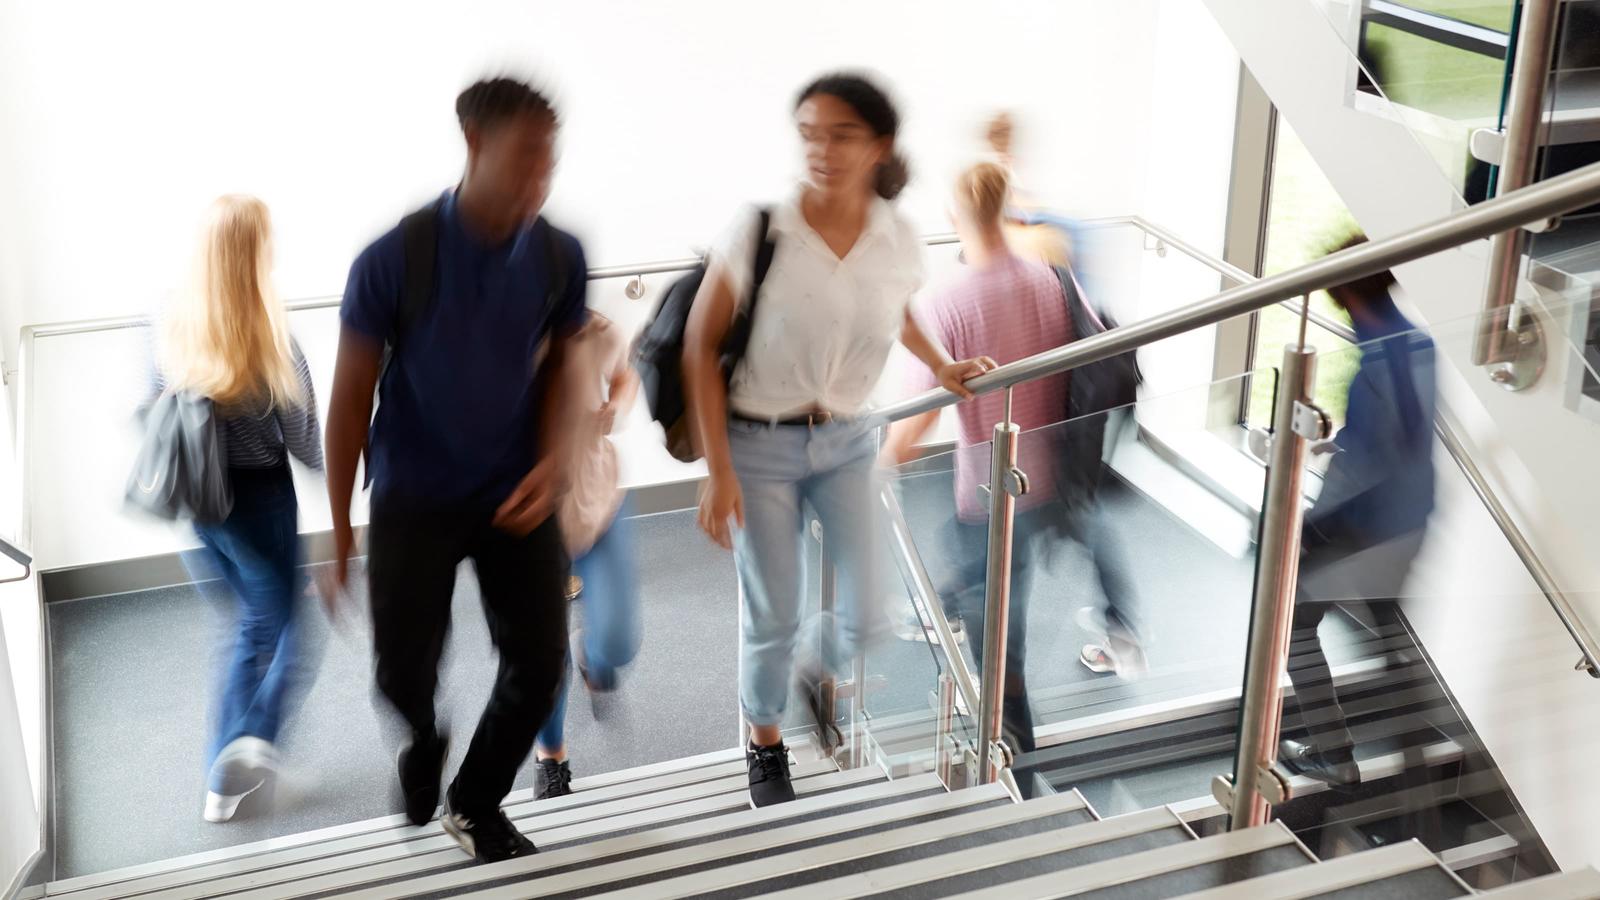 Group of individuals walking up stairs that is blurred